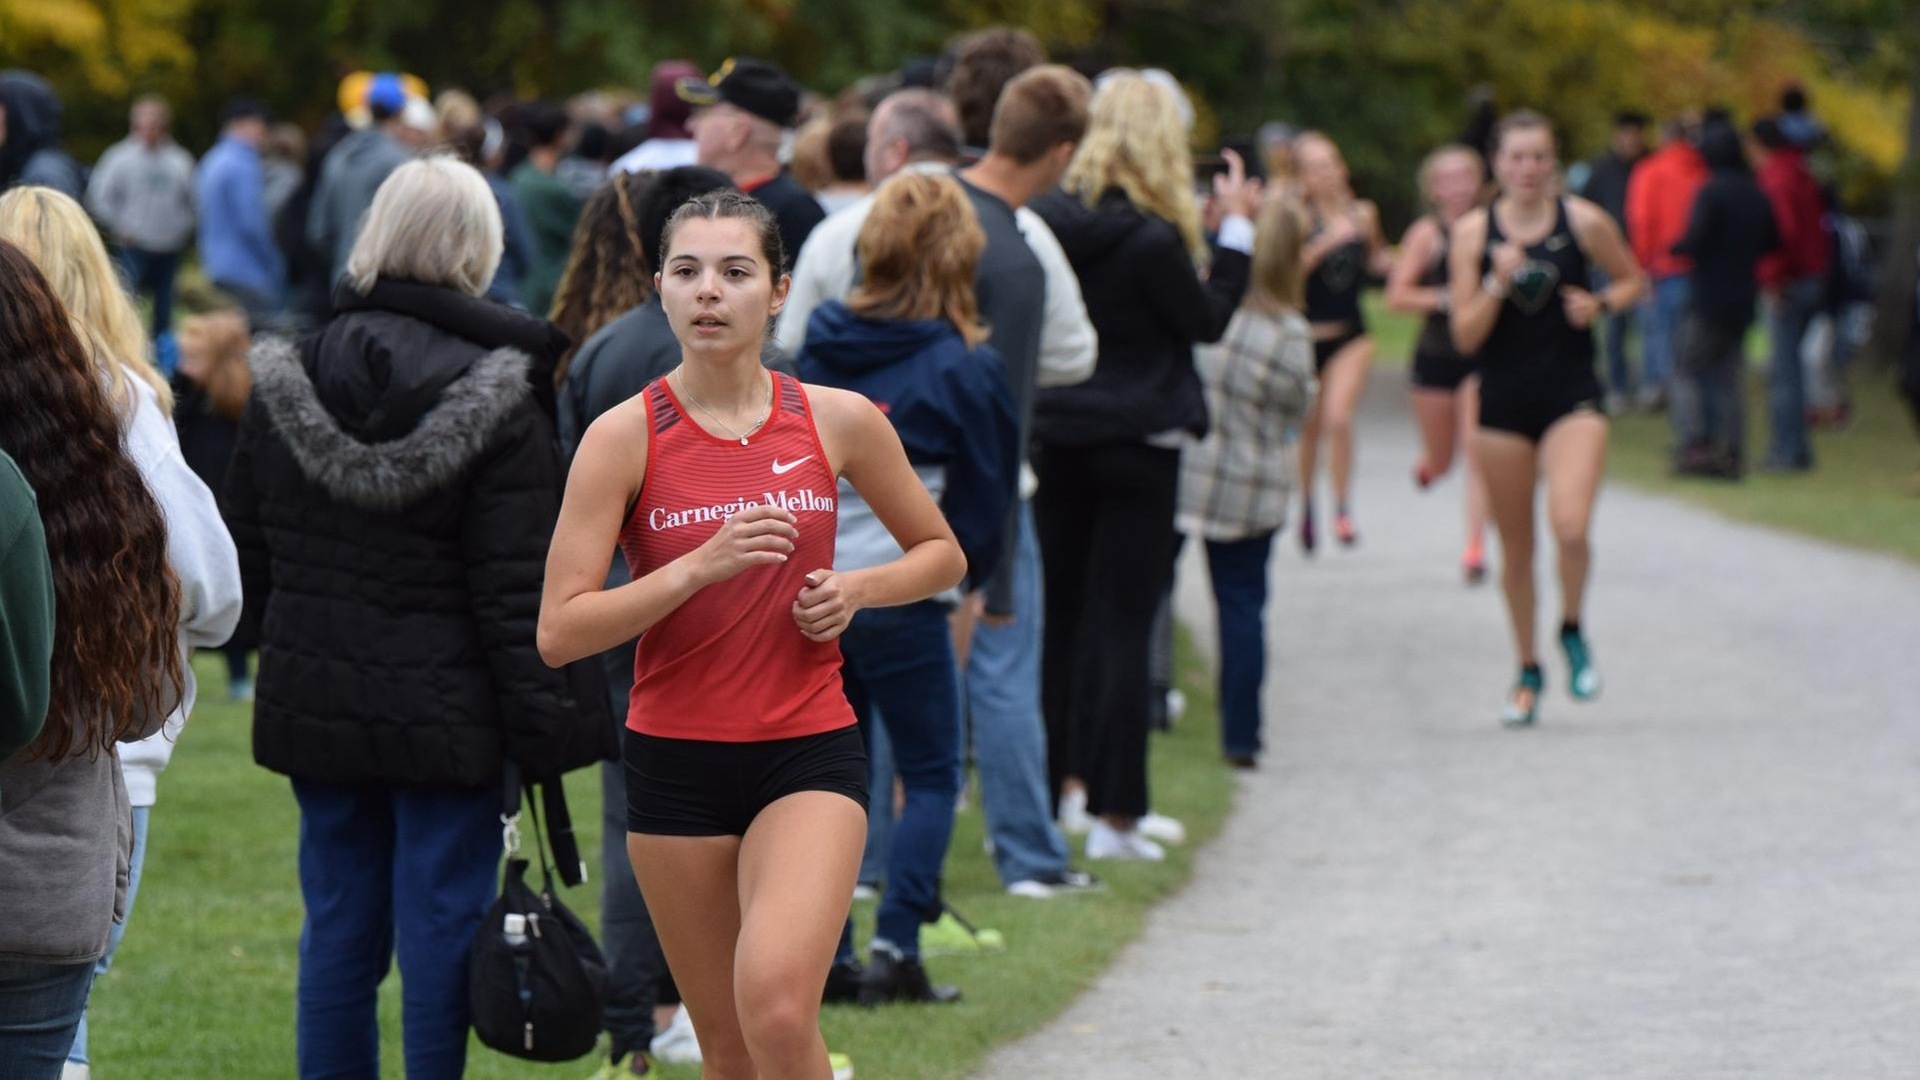 women's cross country runner wearing red jersey and black shorts races on the trail with fans watching behind her